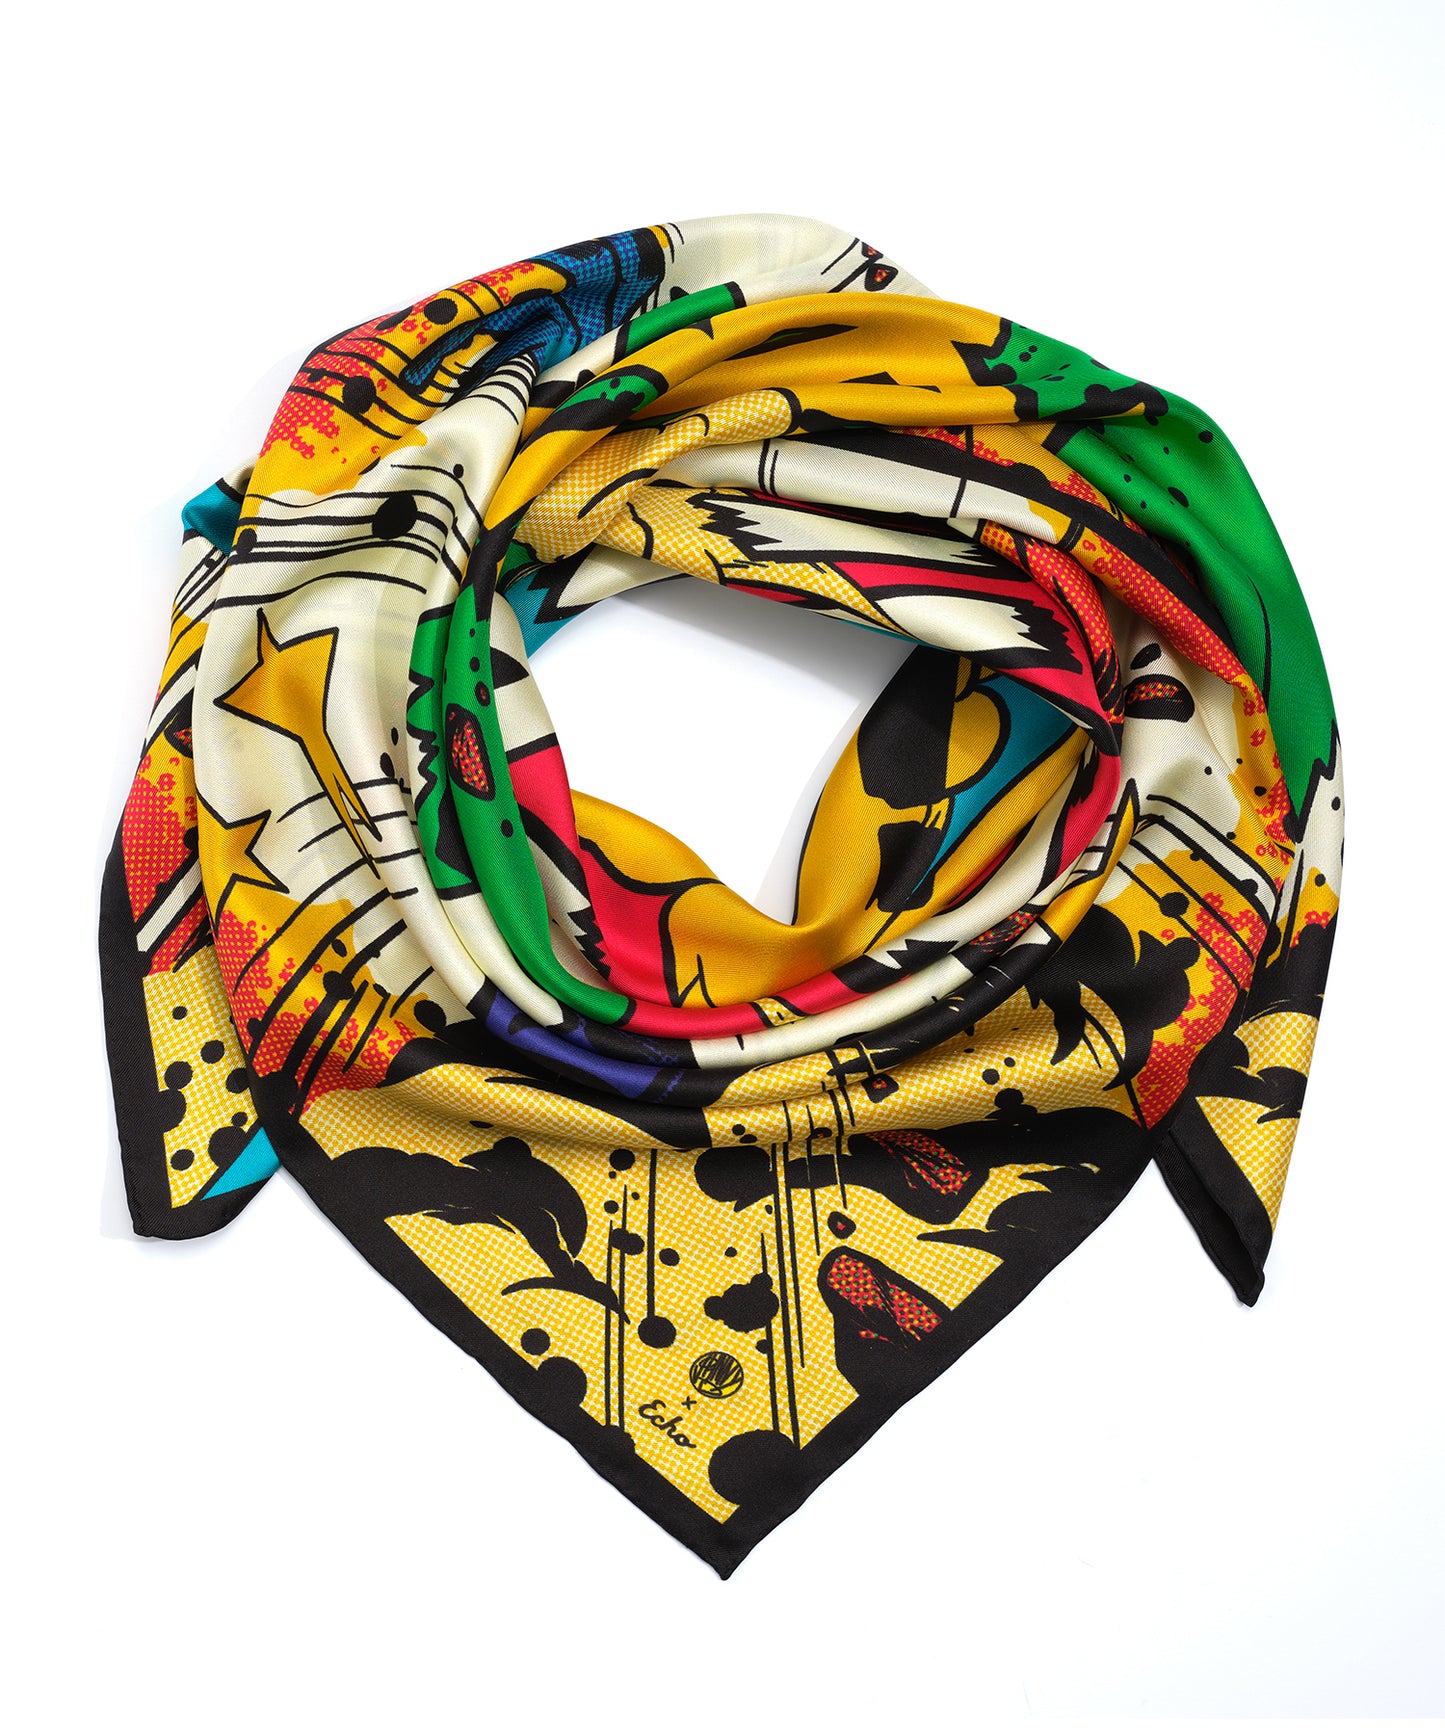 An image of how to wrap the  Pow, Bang, Kaboom, Crash comic book print square silk scarf by Johnny Dombrowski around your neckneck.